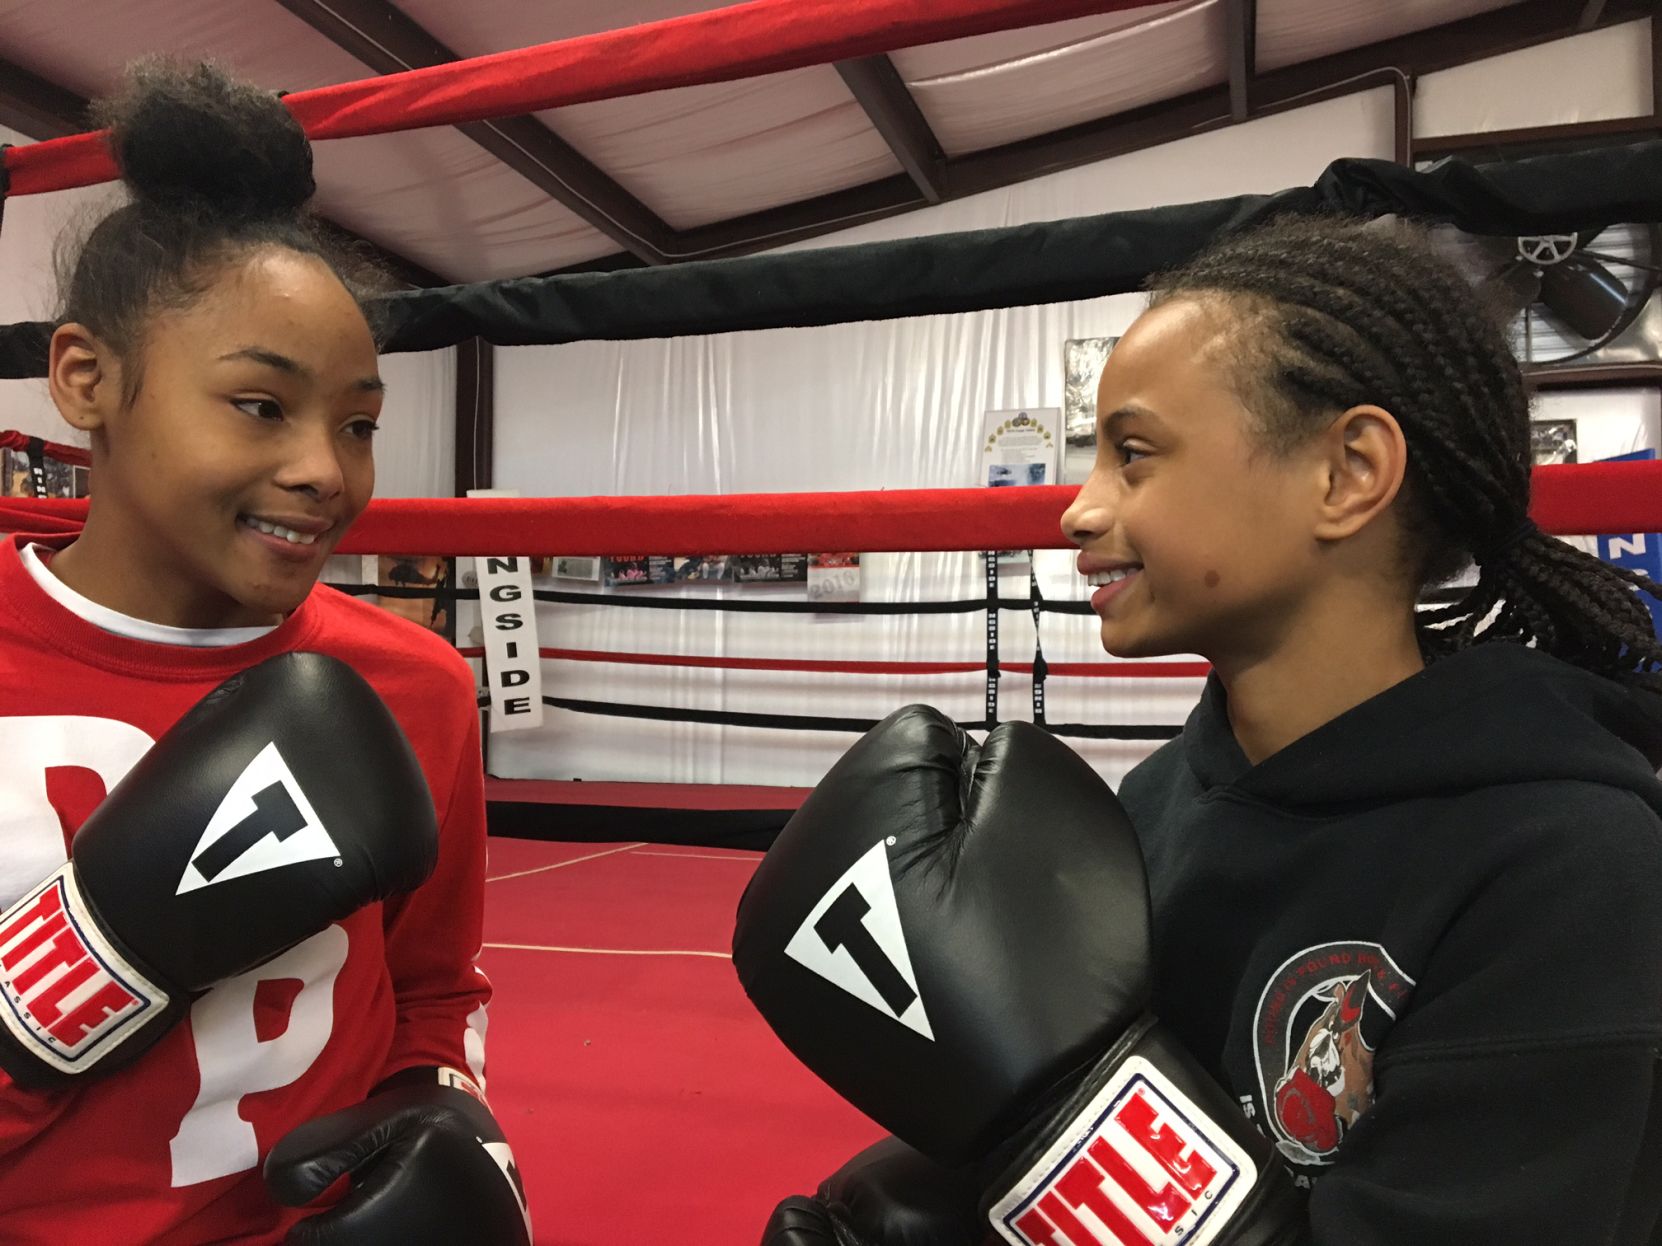 Local youth boxing duo compete in USA National Championships image